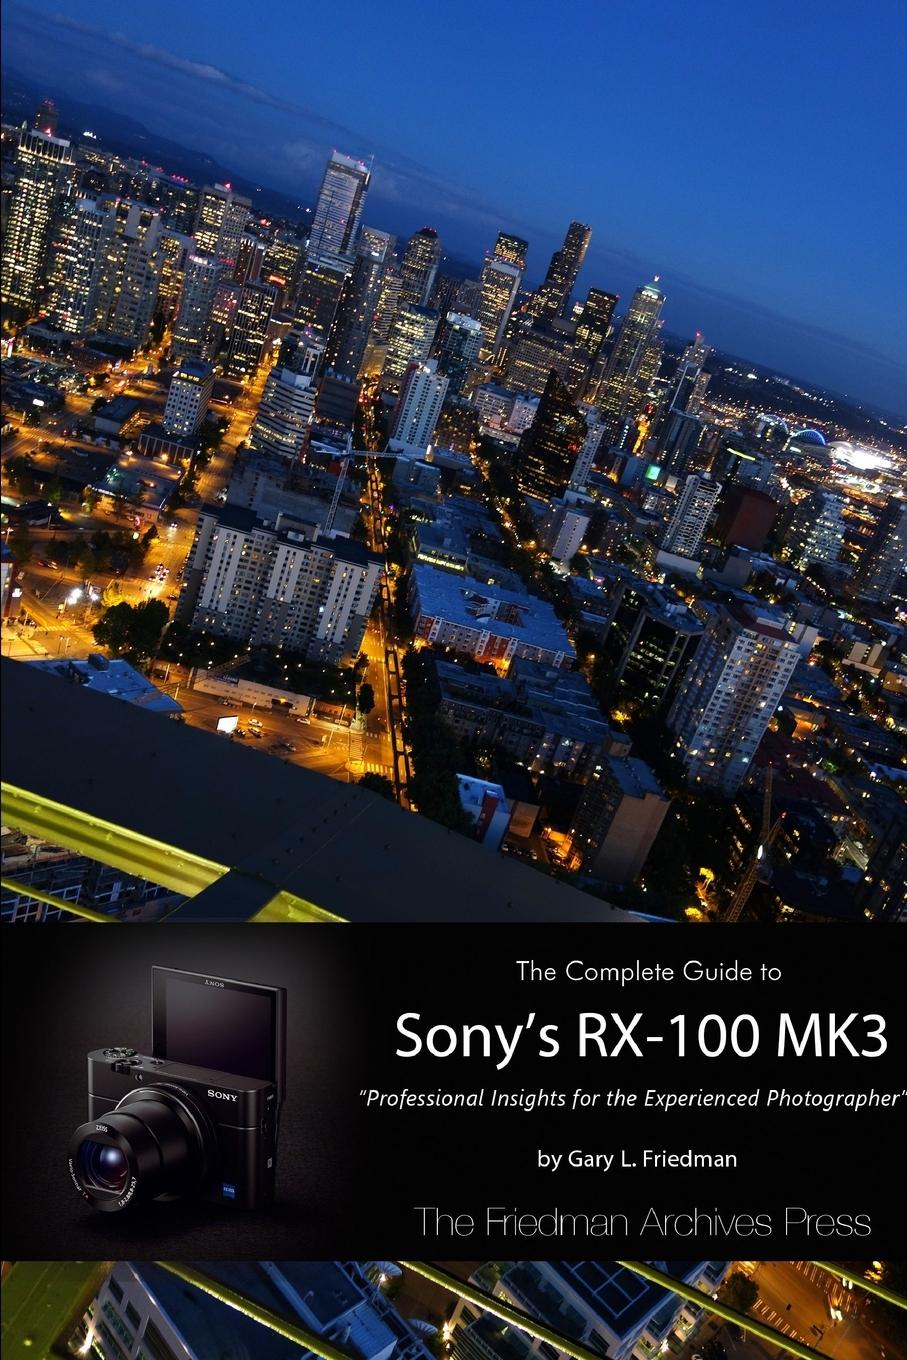 The Complete Guide to Sony s RX-100 MK3 (B&W Edition) - Friedman, Gary L.